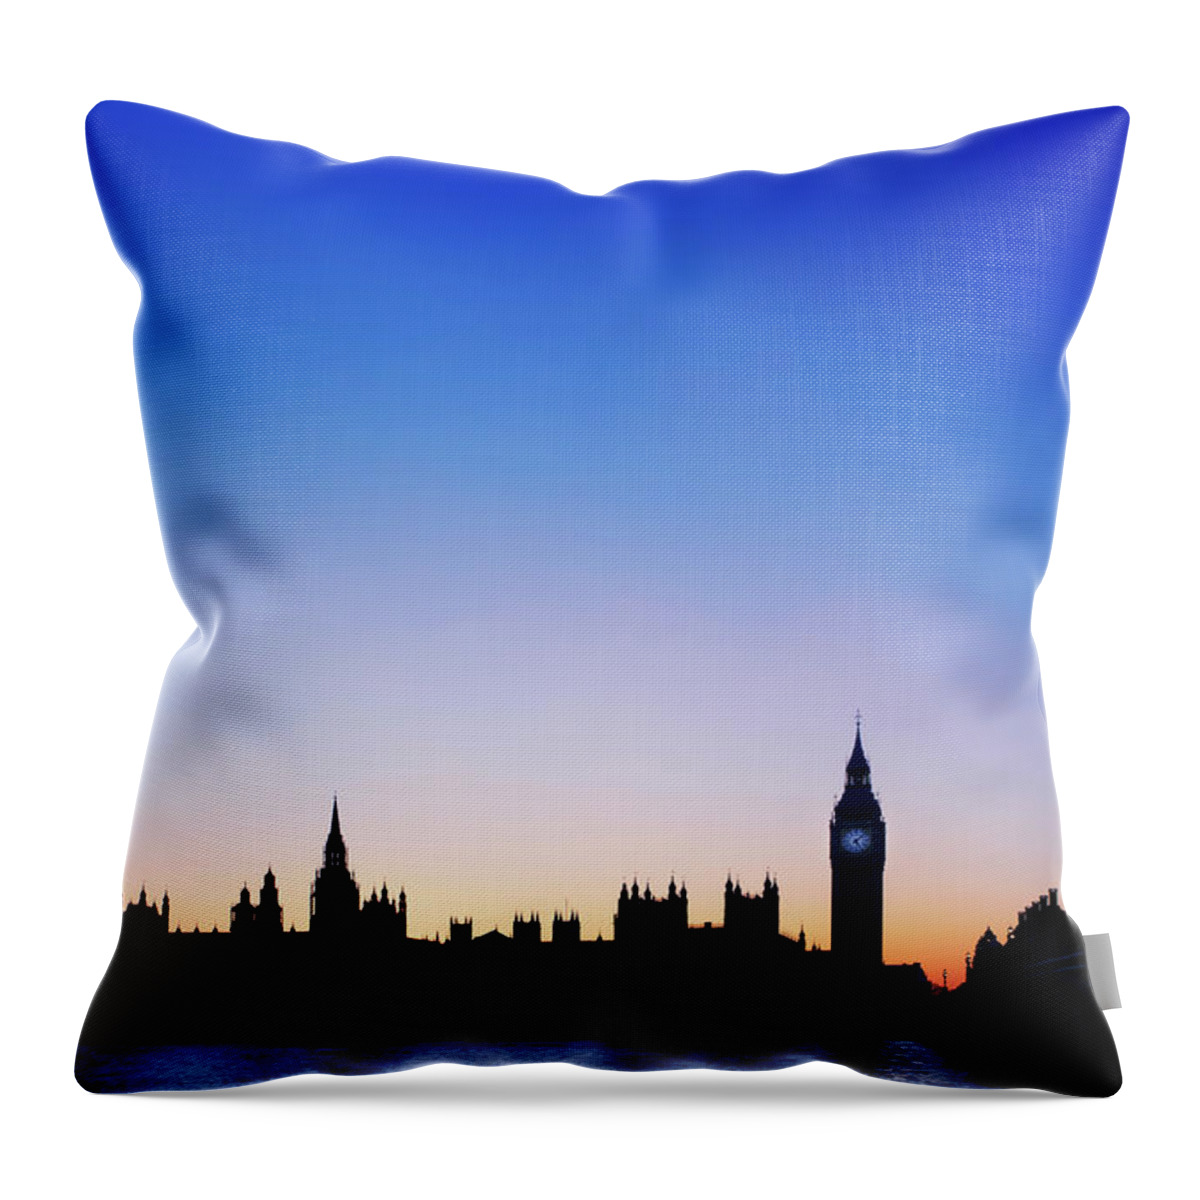 Clear Sky Throw Pillow featuring the photograph Palace Of Westminster #1 by Adam Gault